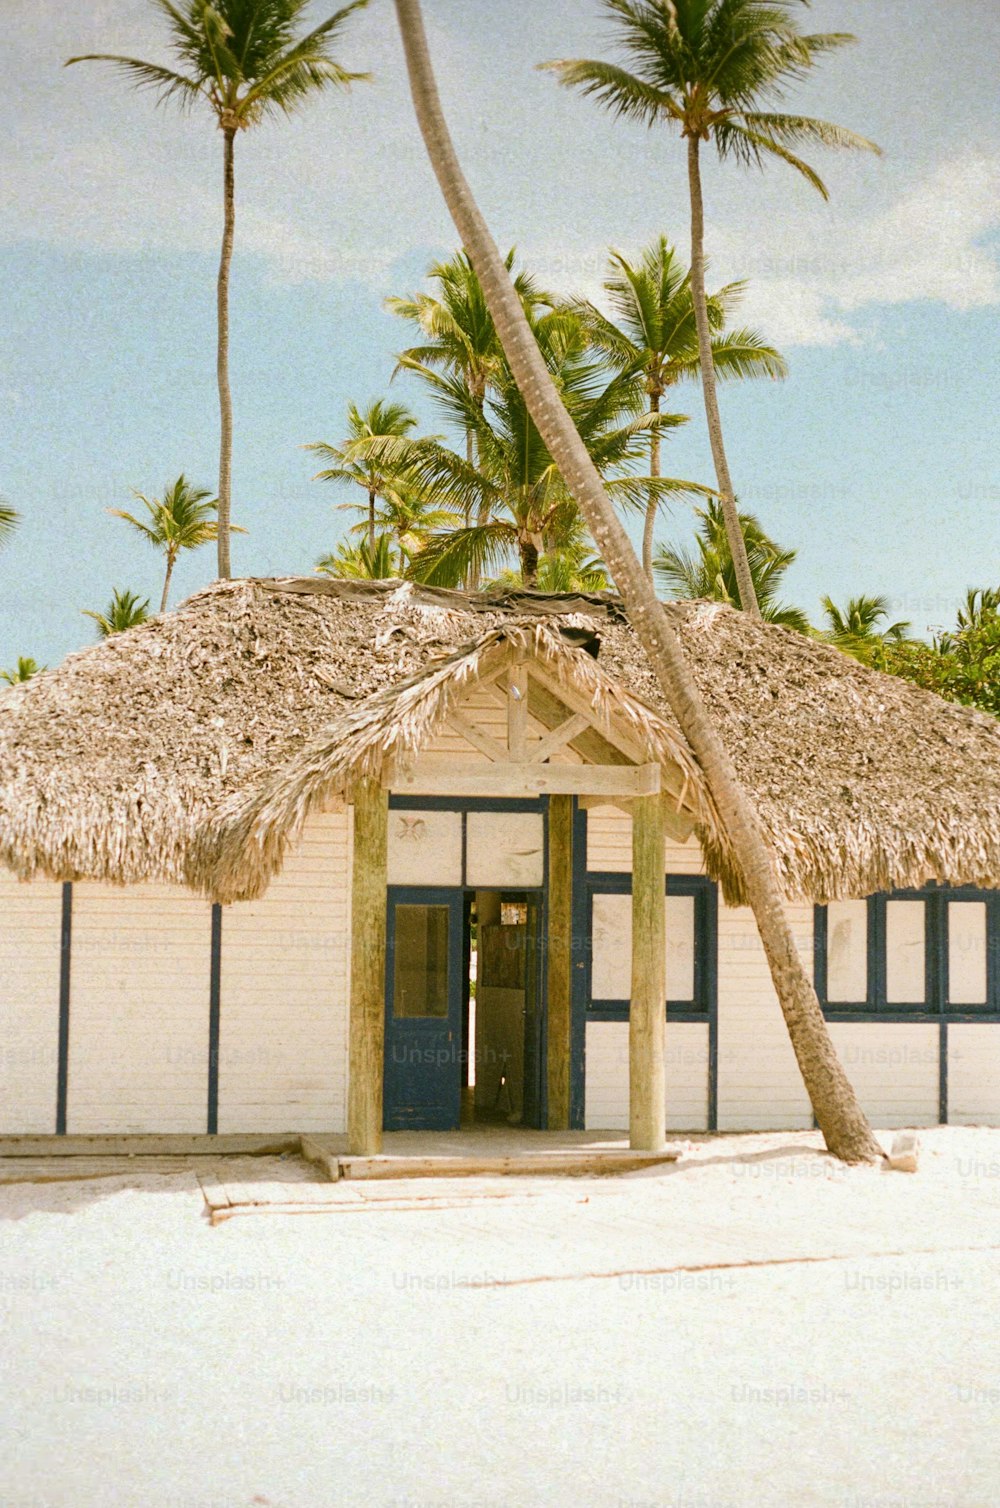 a hut with a thatched roof and palm trees